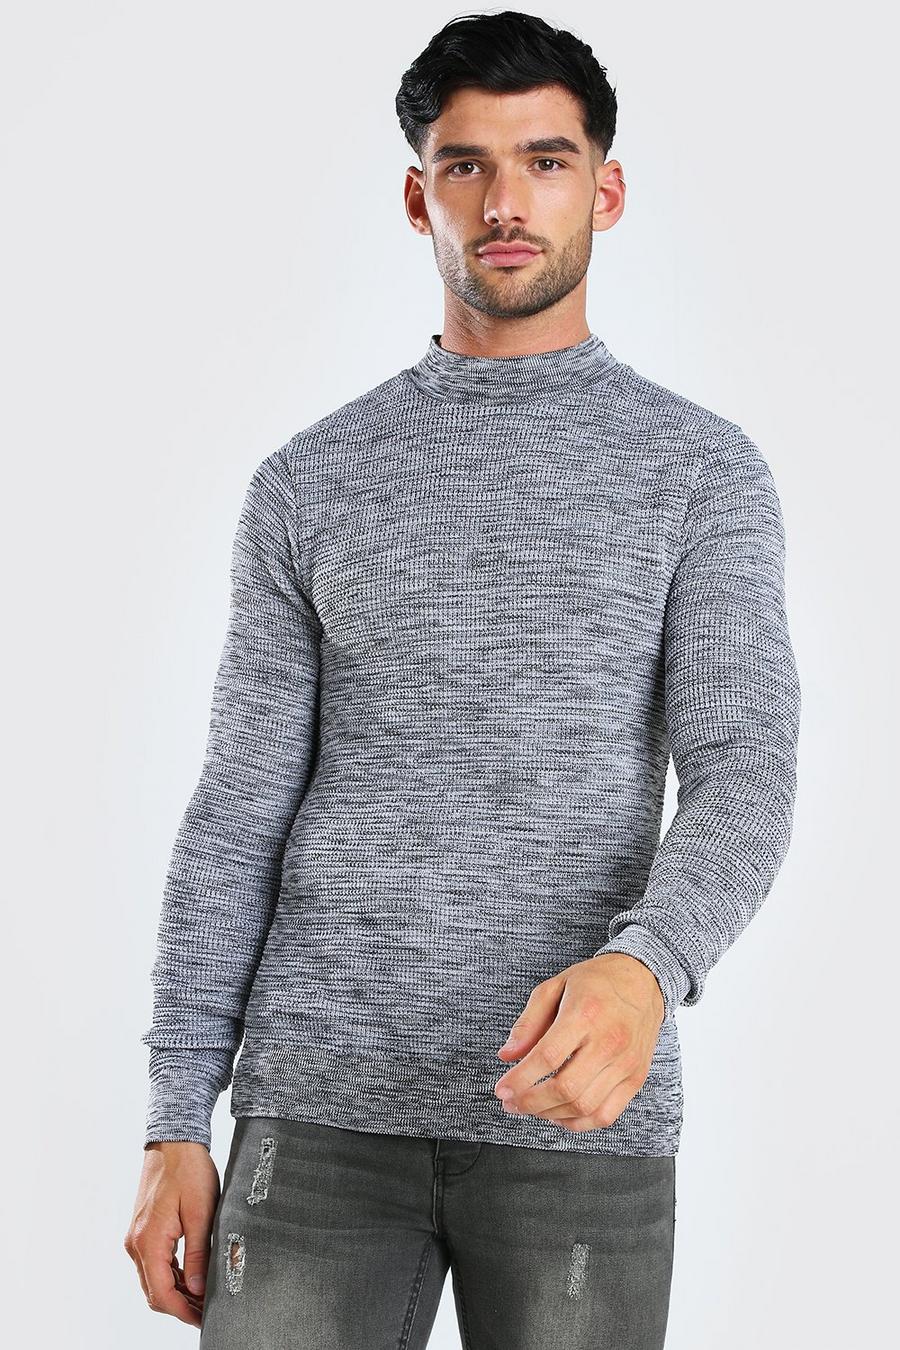 Black Muscle Fit Waffle Knit Turtle Neck Sweater image number 1